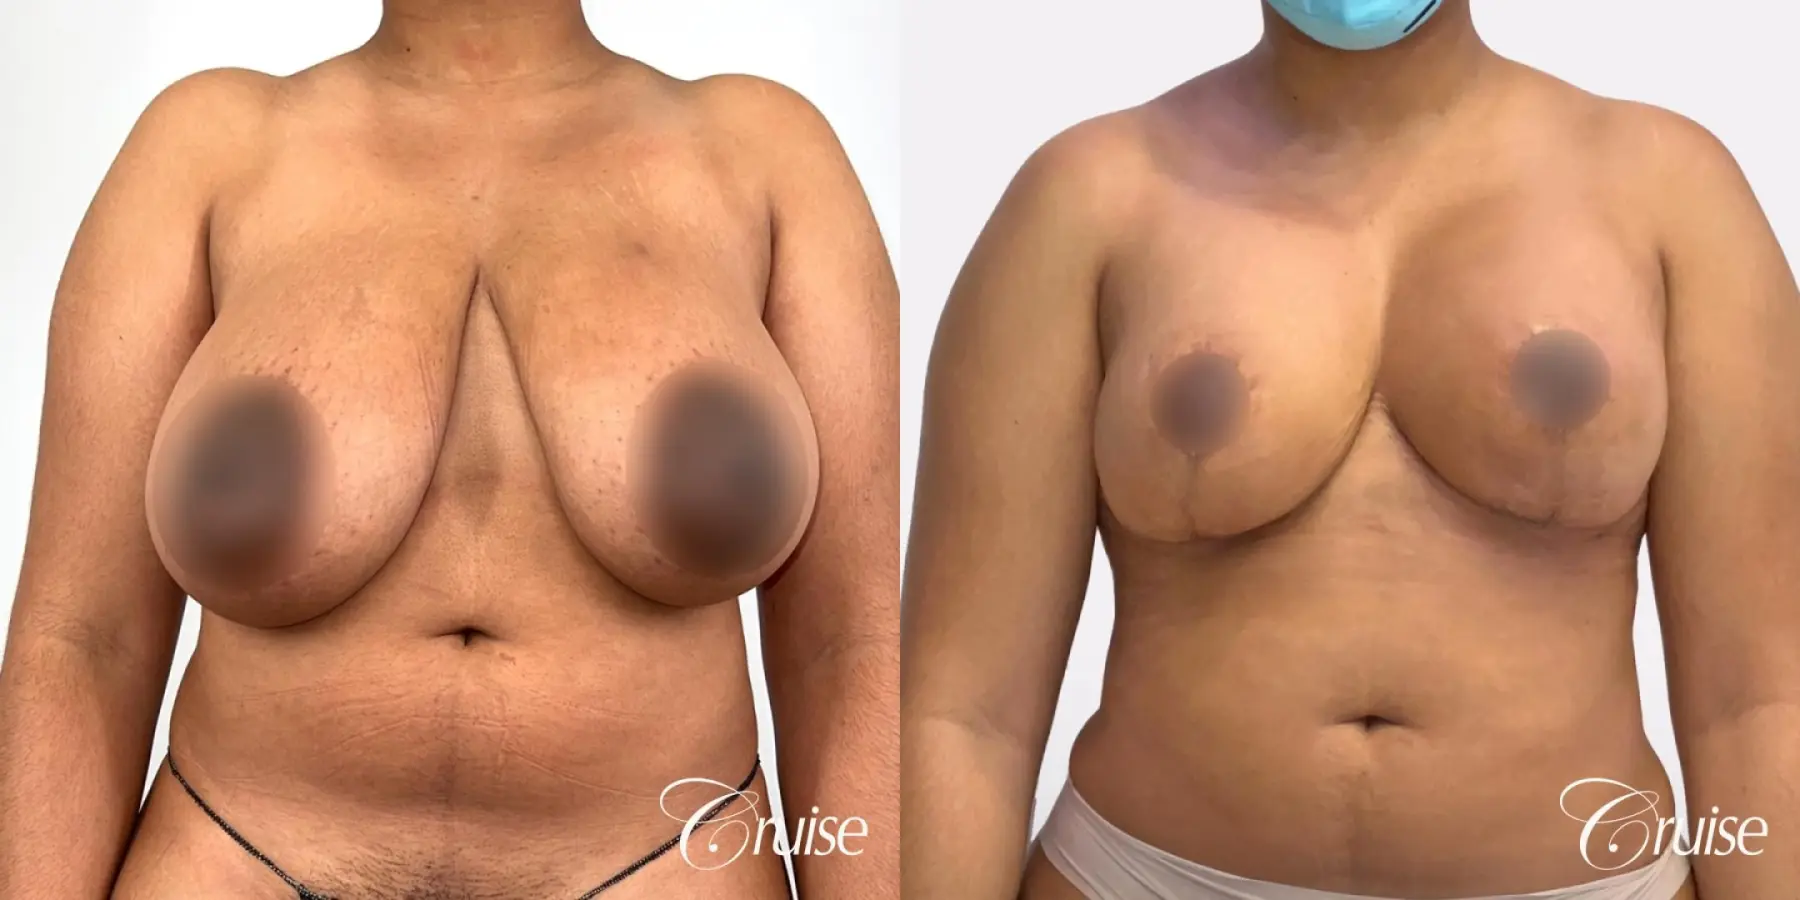 Breast Reduction & Breast Lift - Before and After 1